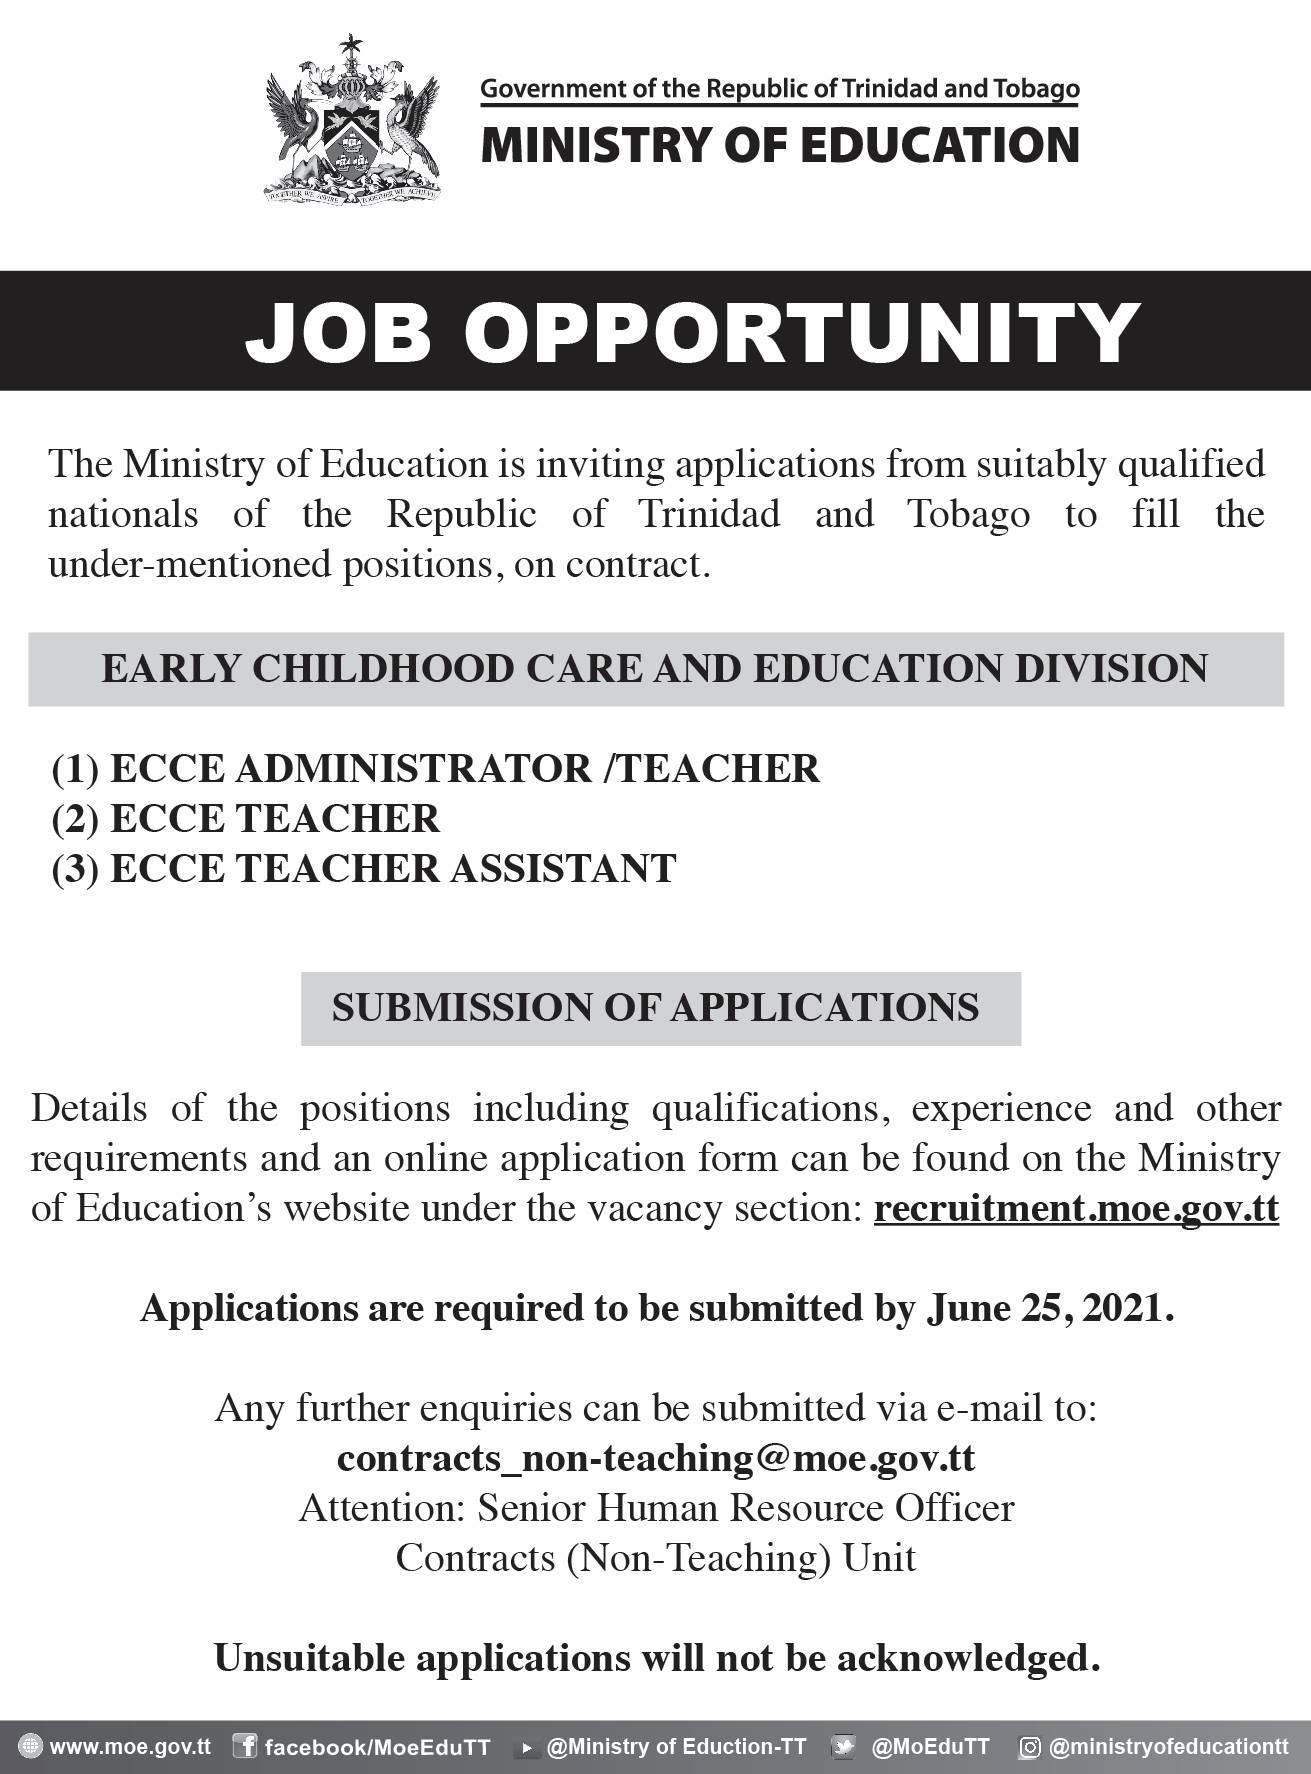 Careers in the Ministry of Education